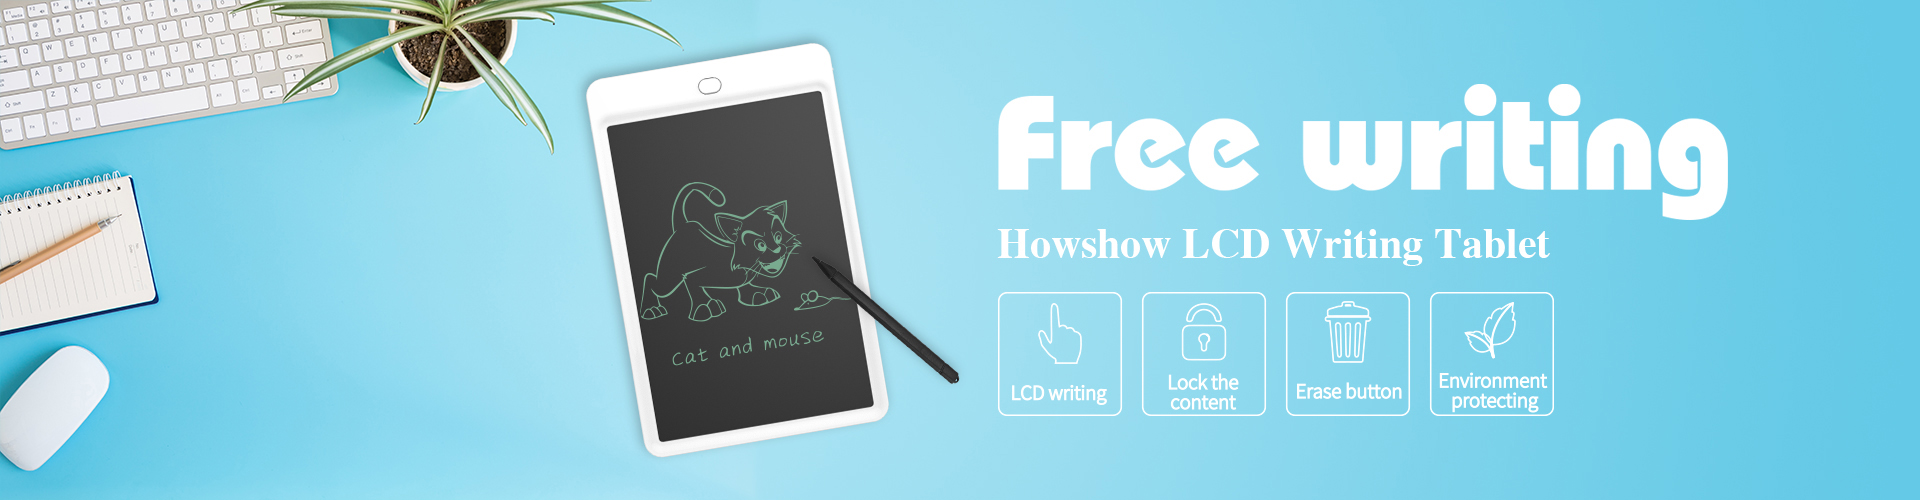 free writing. Howshow LCD Writing Tablet. 10 inch handwriting board